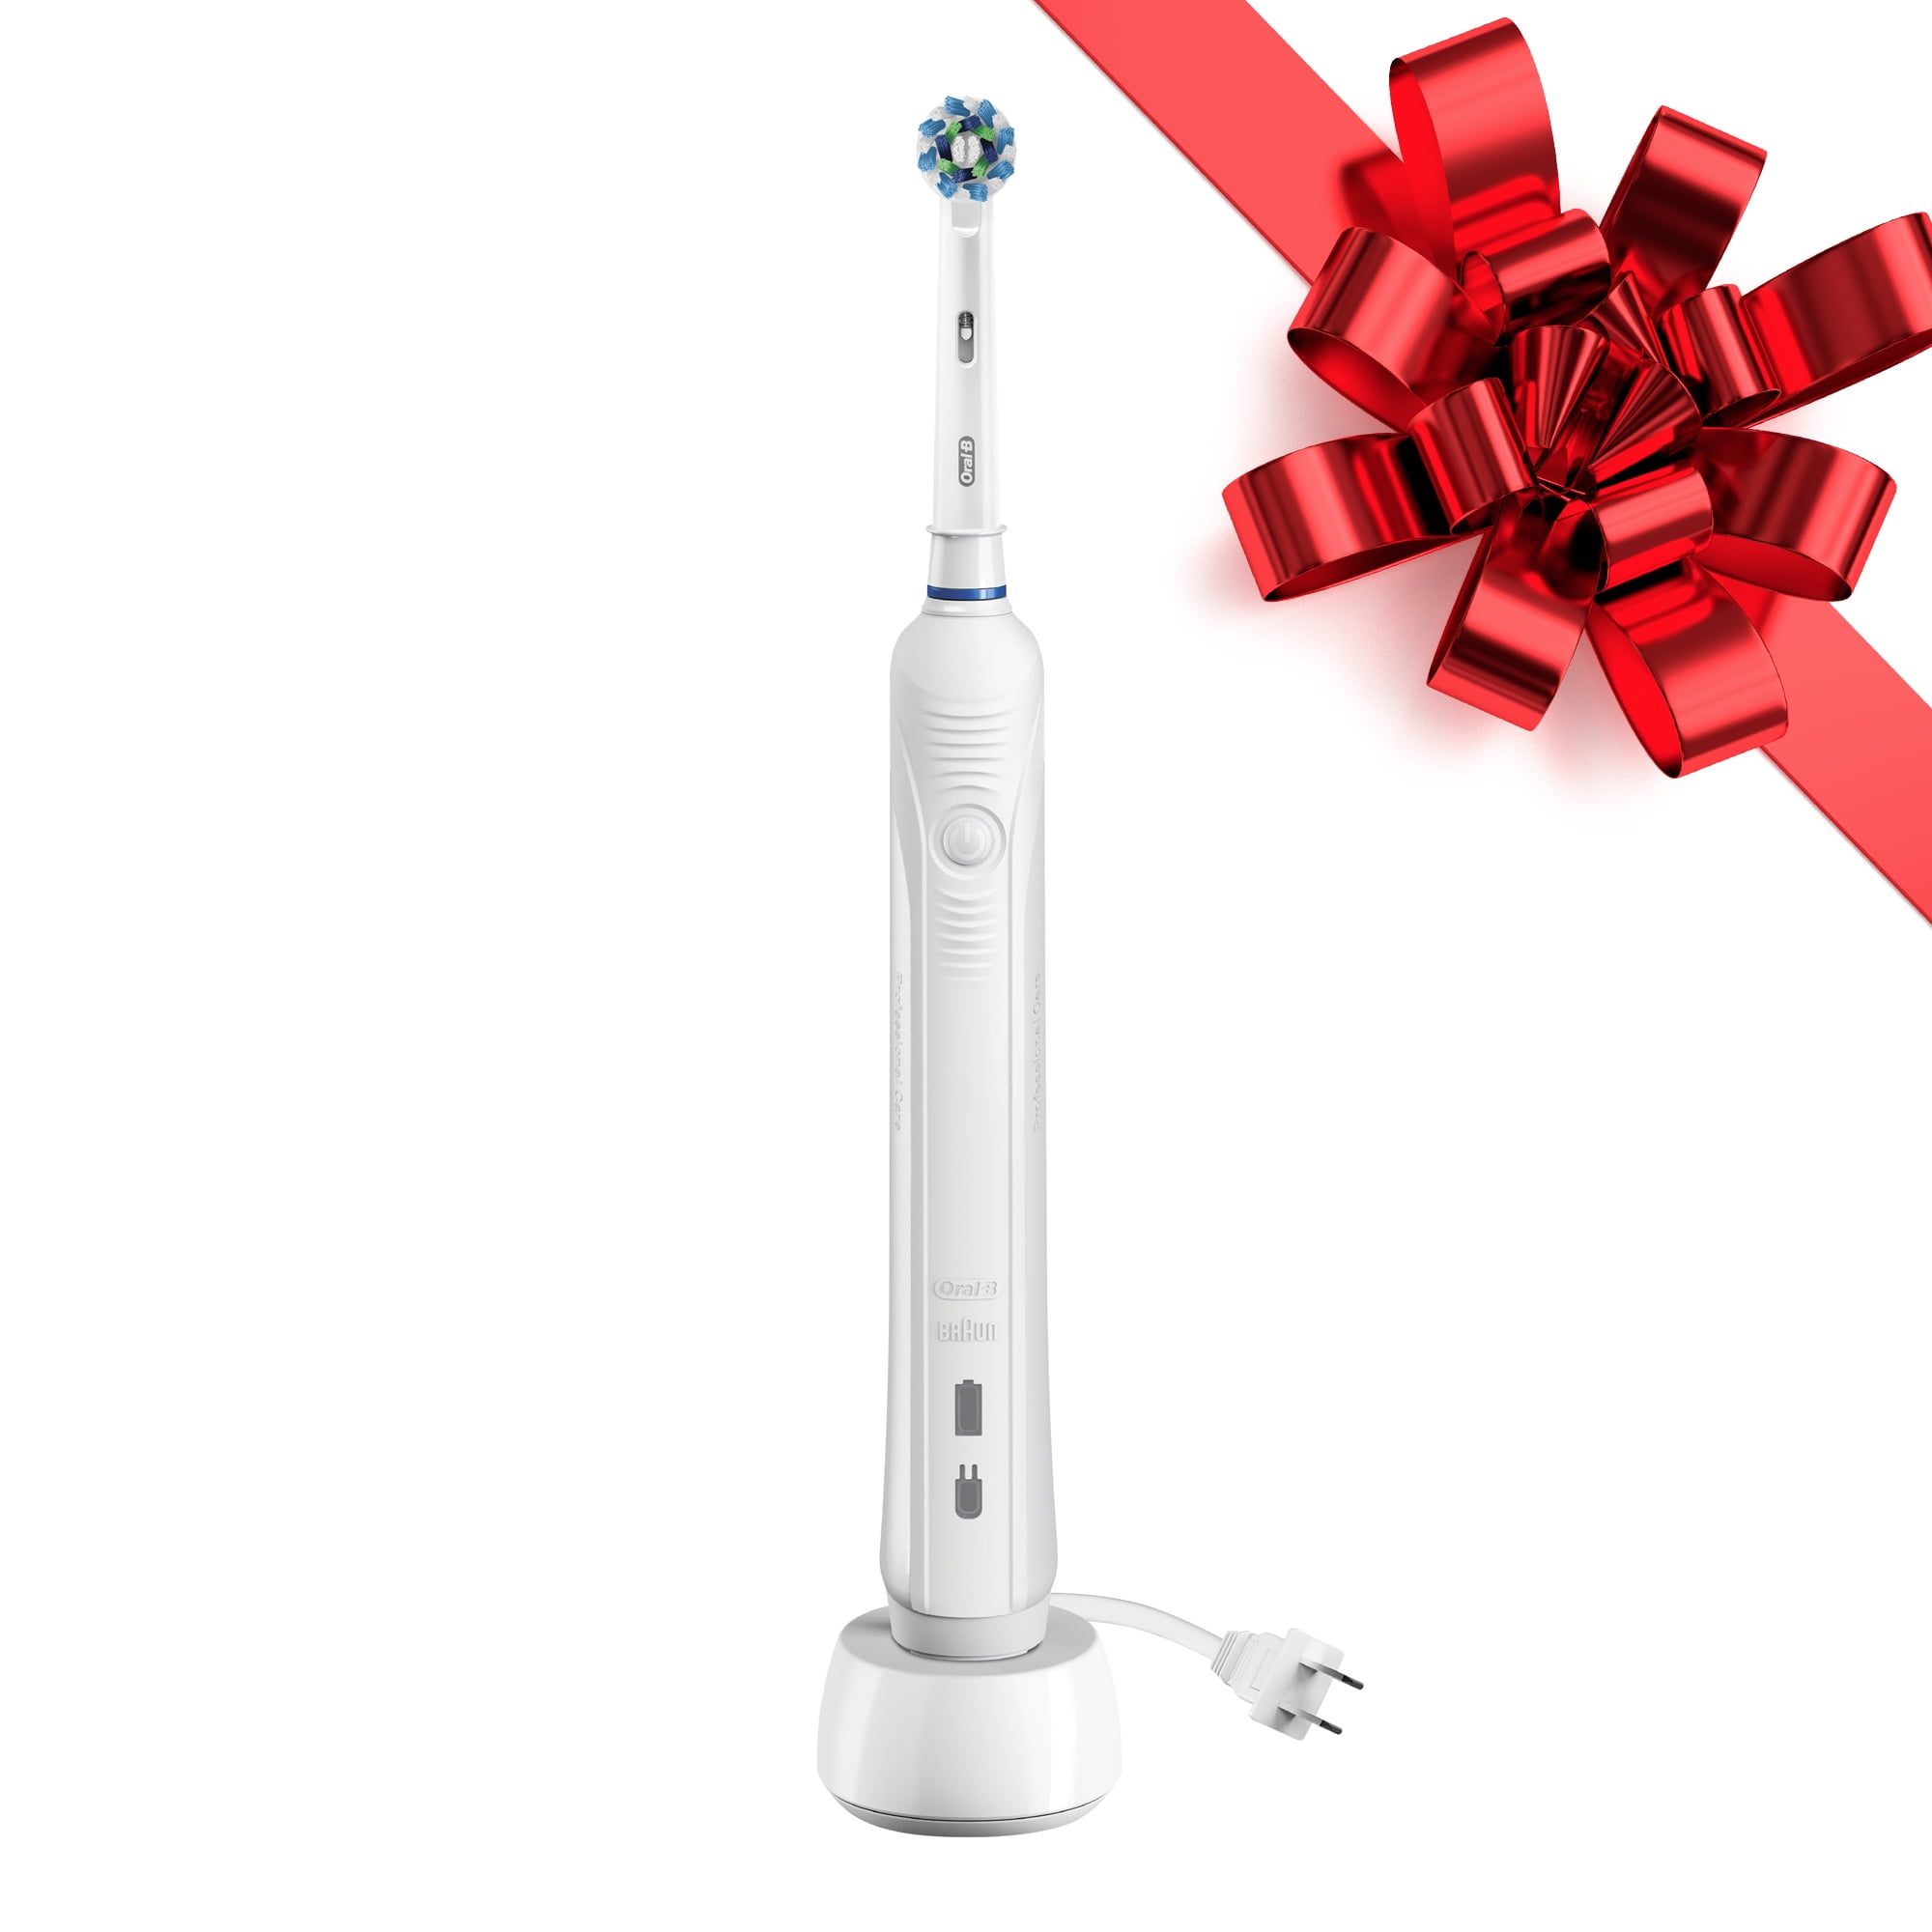 oral-b-1000-crossaction-electric-toothbrush-5-rebate-eligible-white